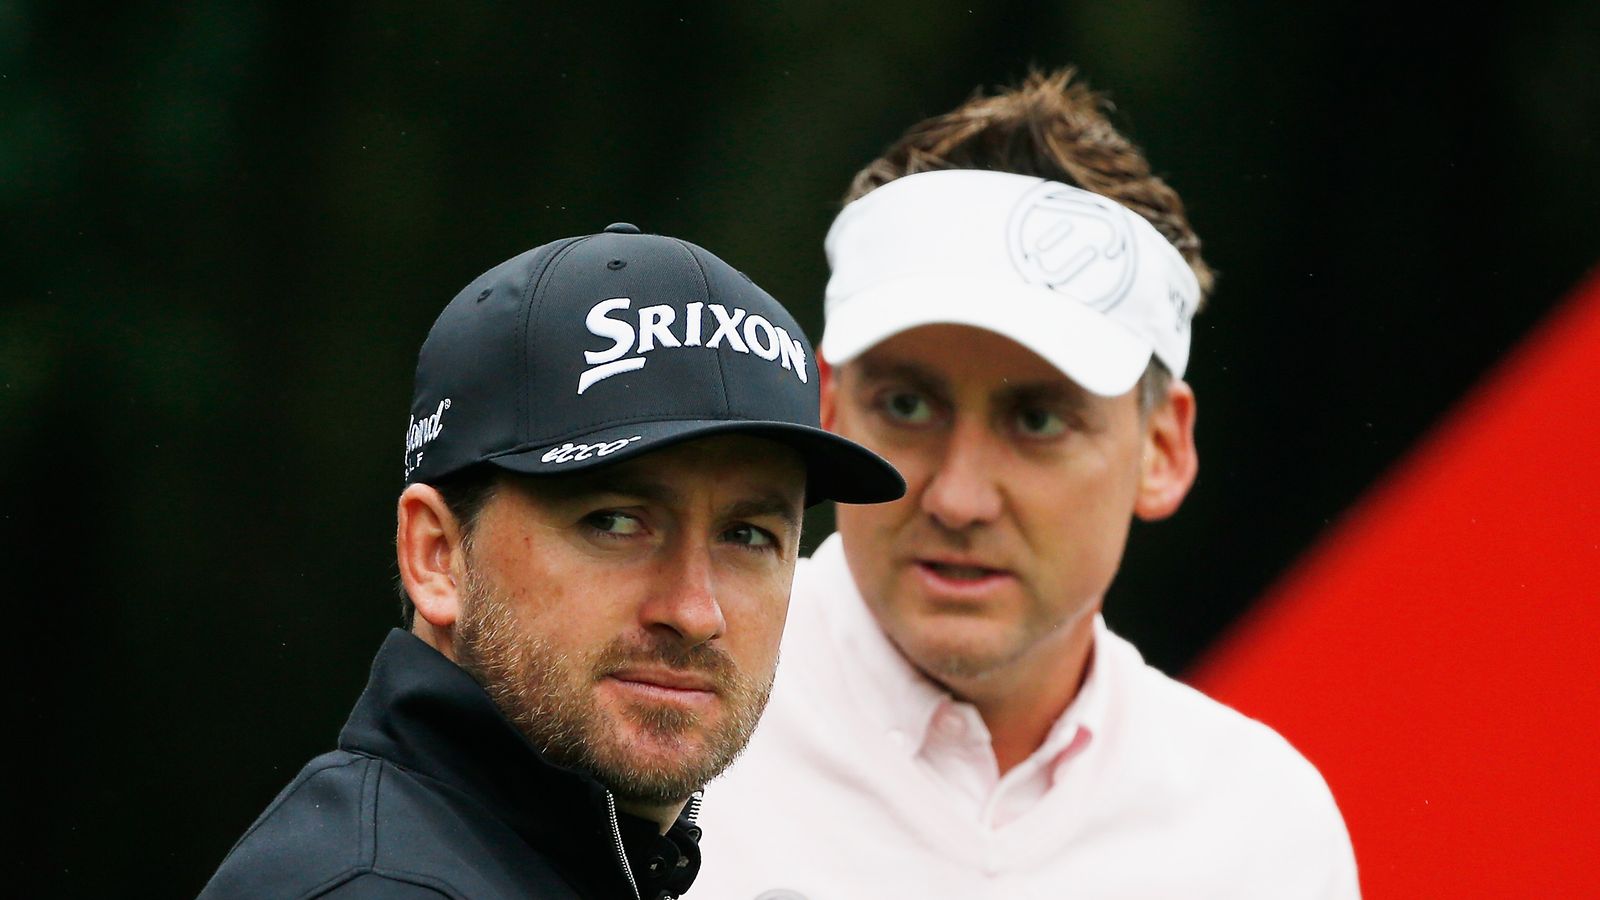 Mastercard Suspends Deals With McDowell And Poulter In Latest LIV Fallout